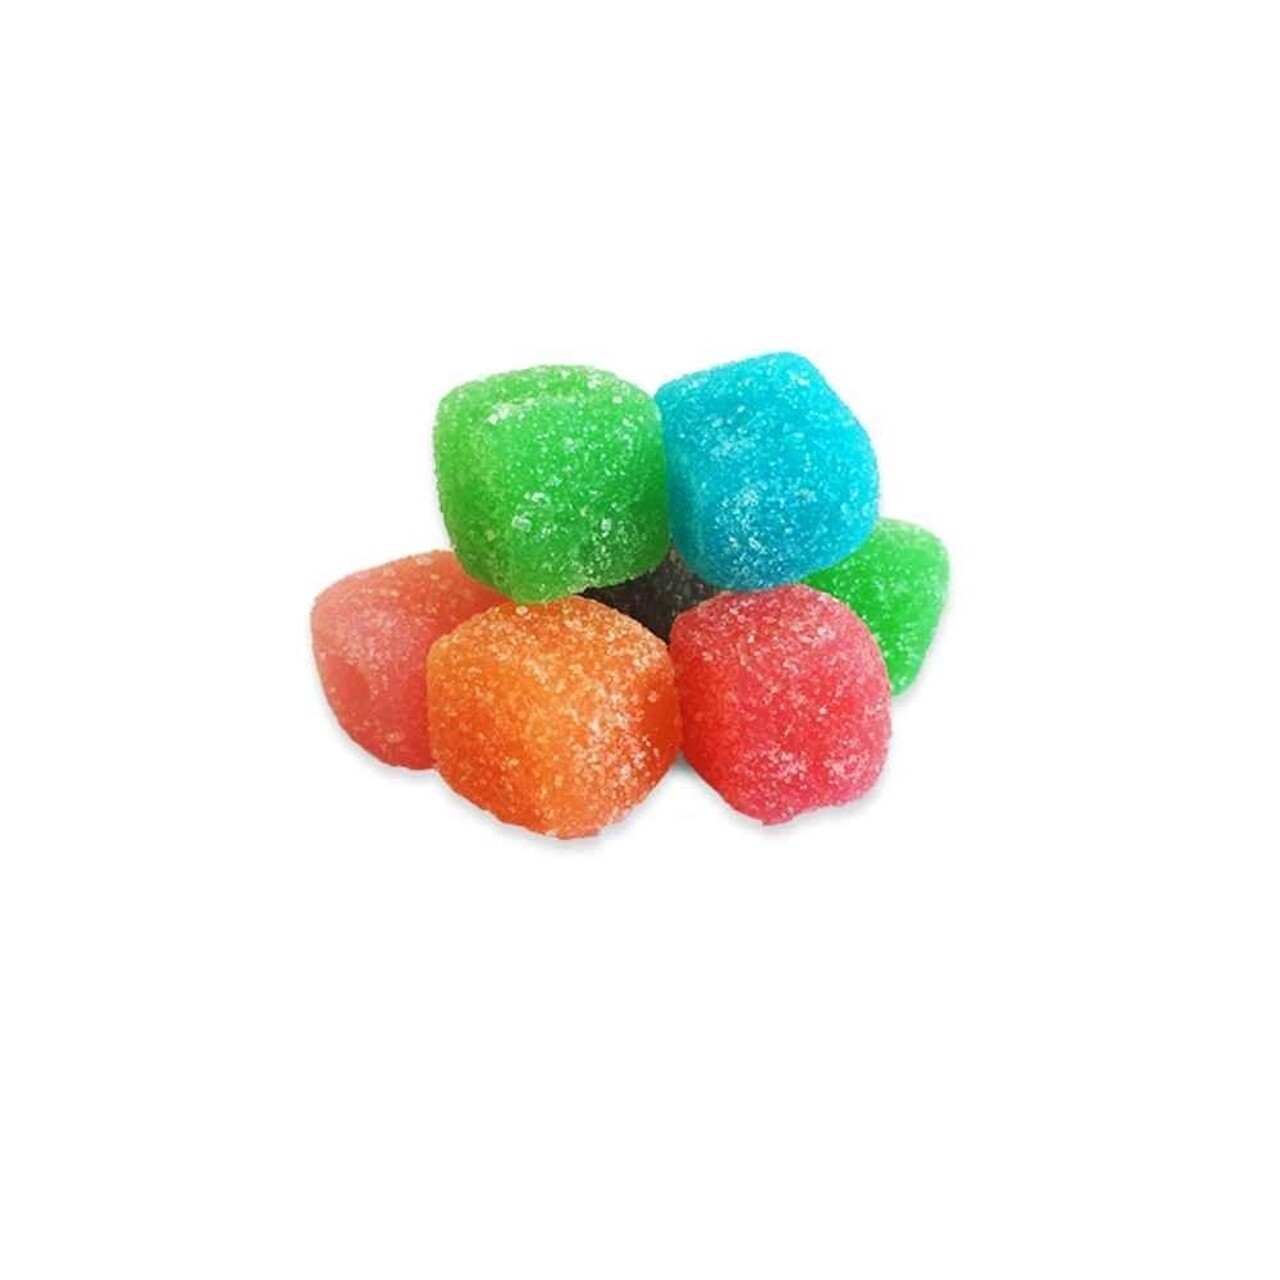 D8 100mg House Gummy, Flavor: Tropical Punch